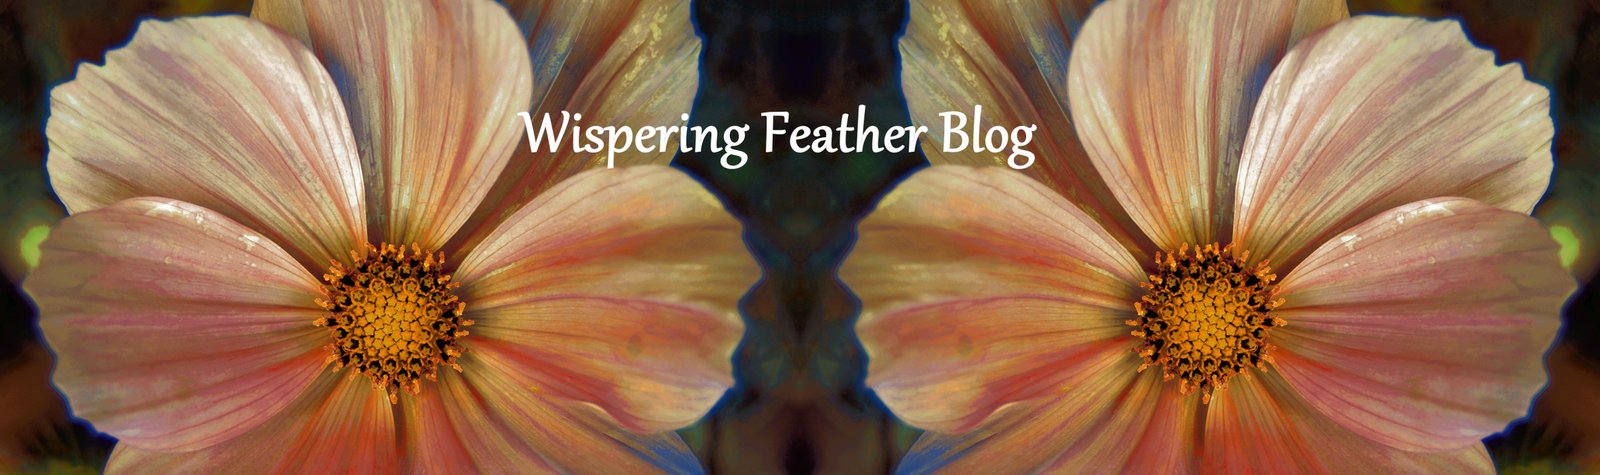 Whispering Feather